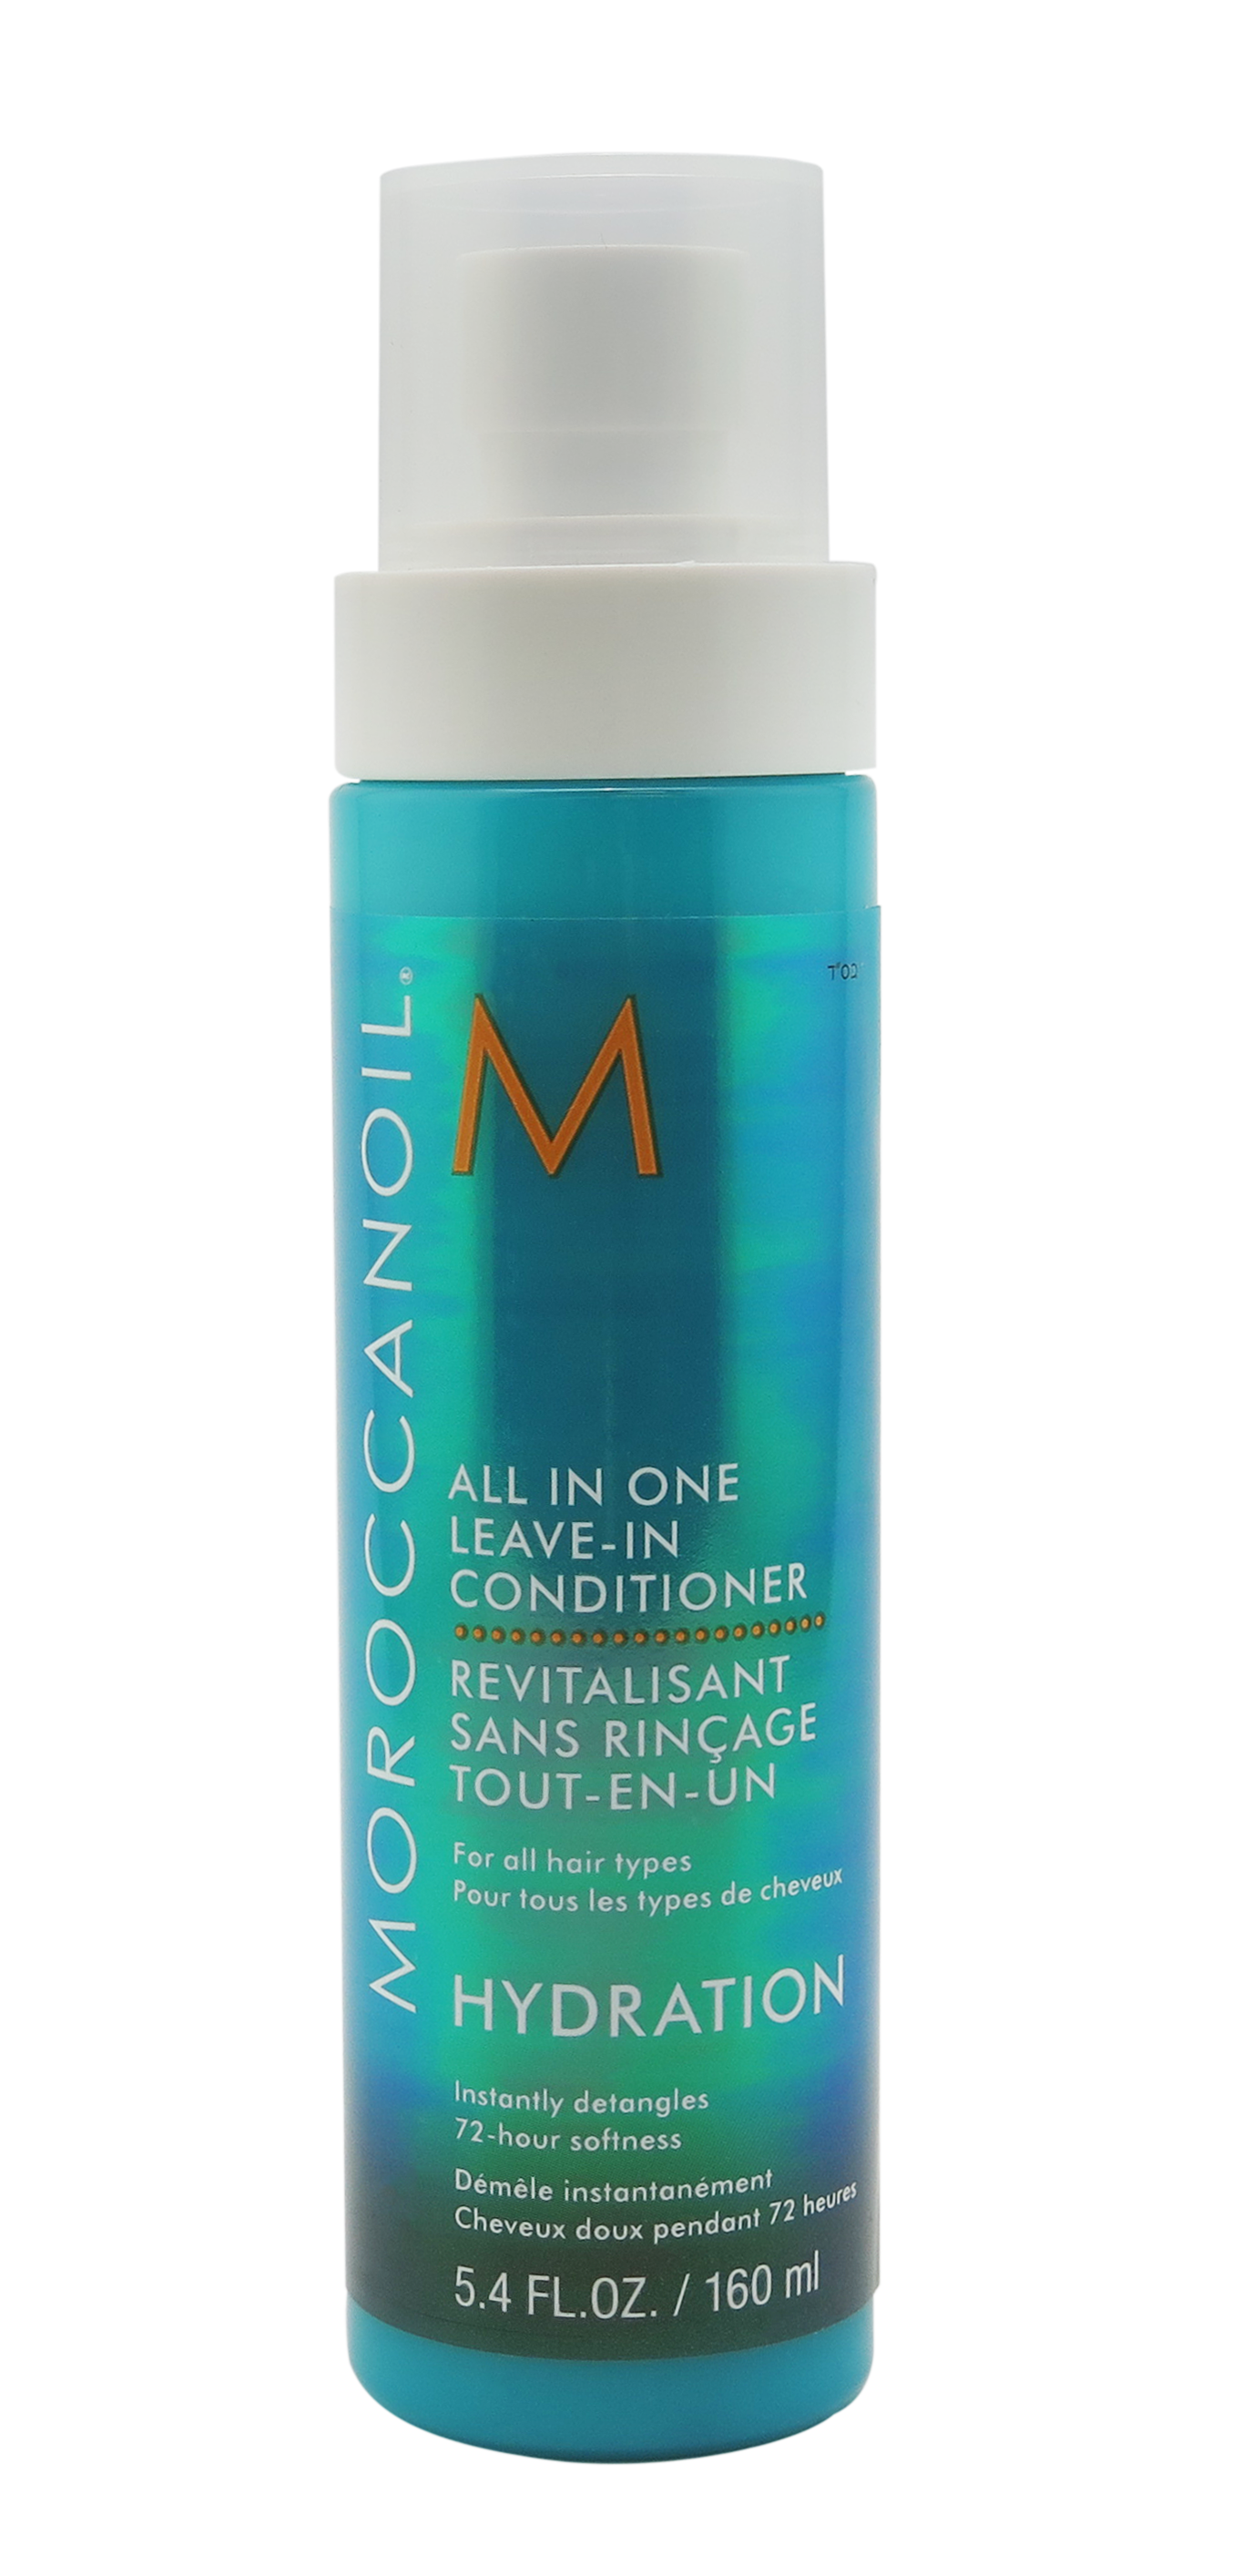 Moroccanoil Hydration All In One Leave-In Conditioner 5.4 fl oz